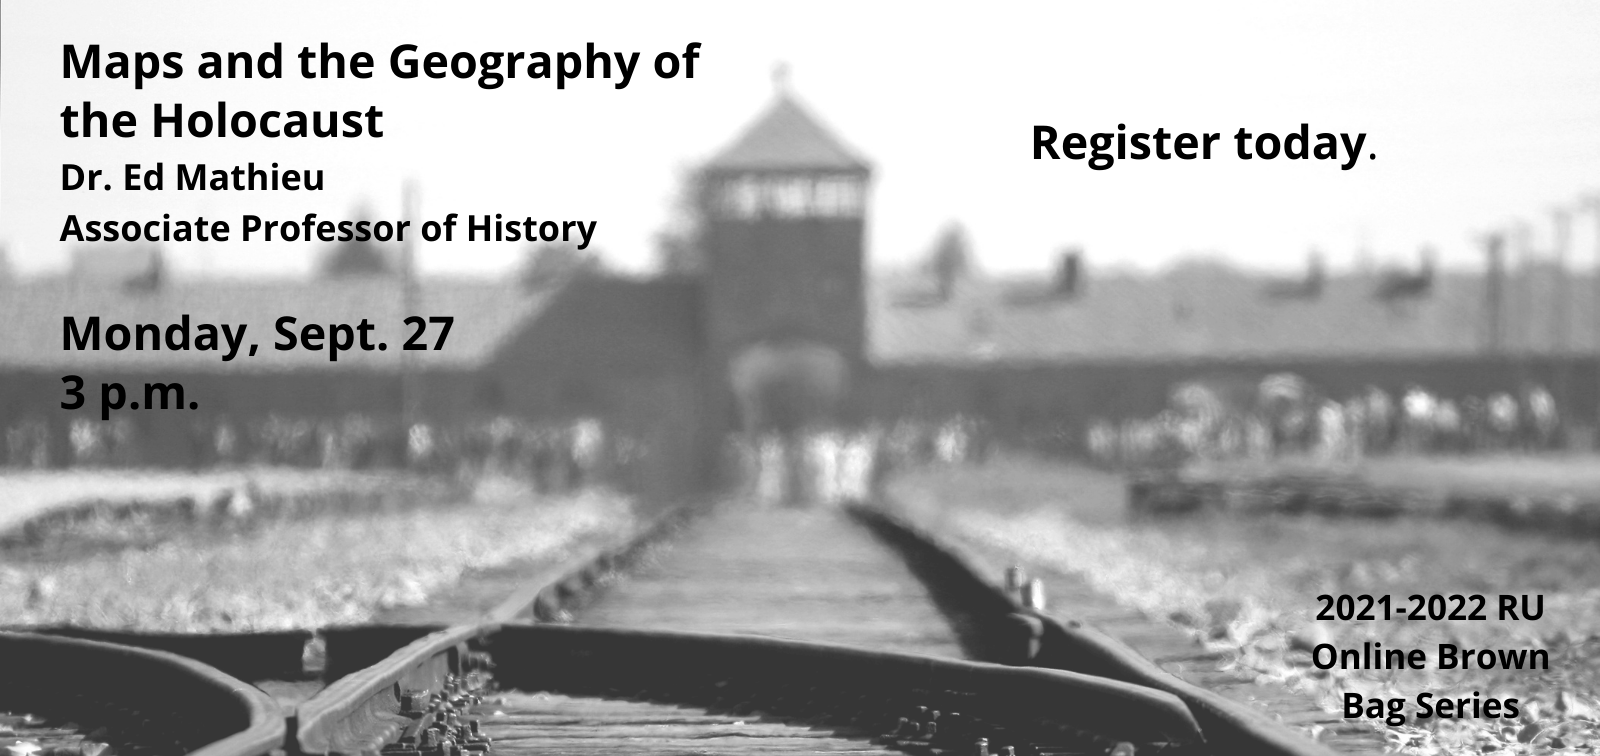 Image for Fall 2021 Brown Bag Presentation, "Maps and the Geography of the Holocaust" webinar